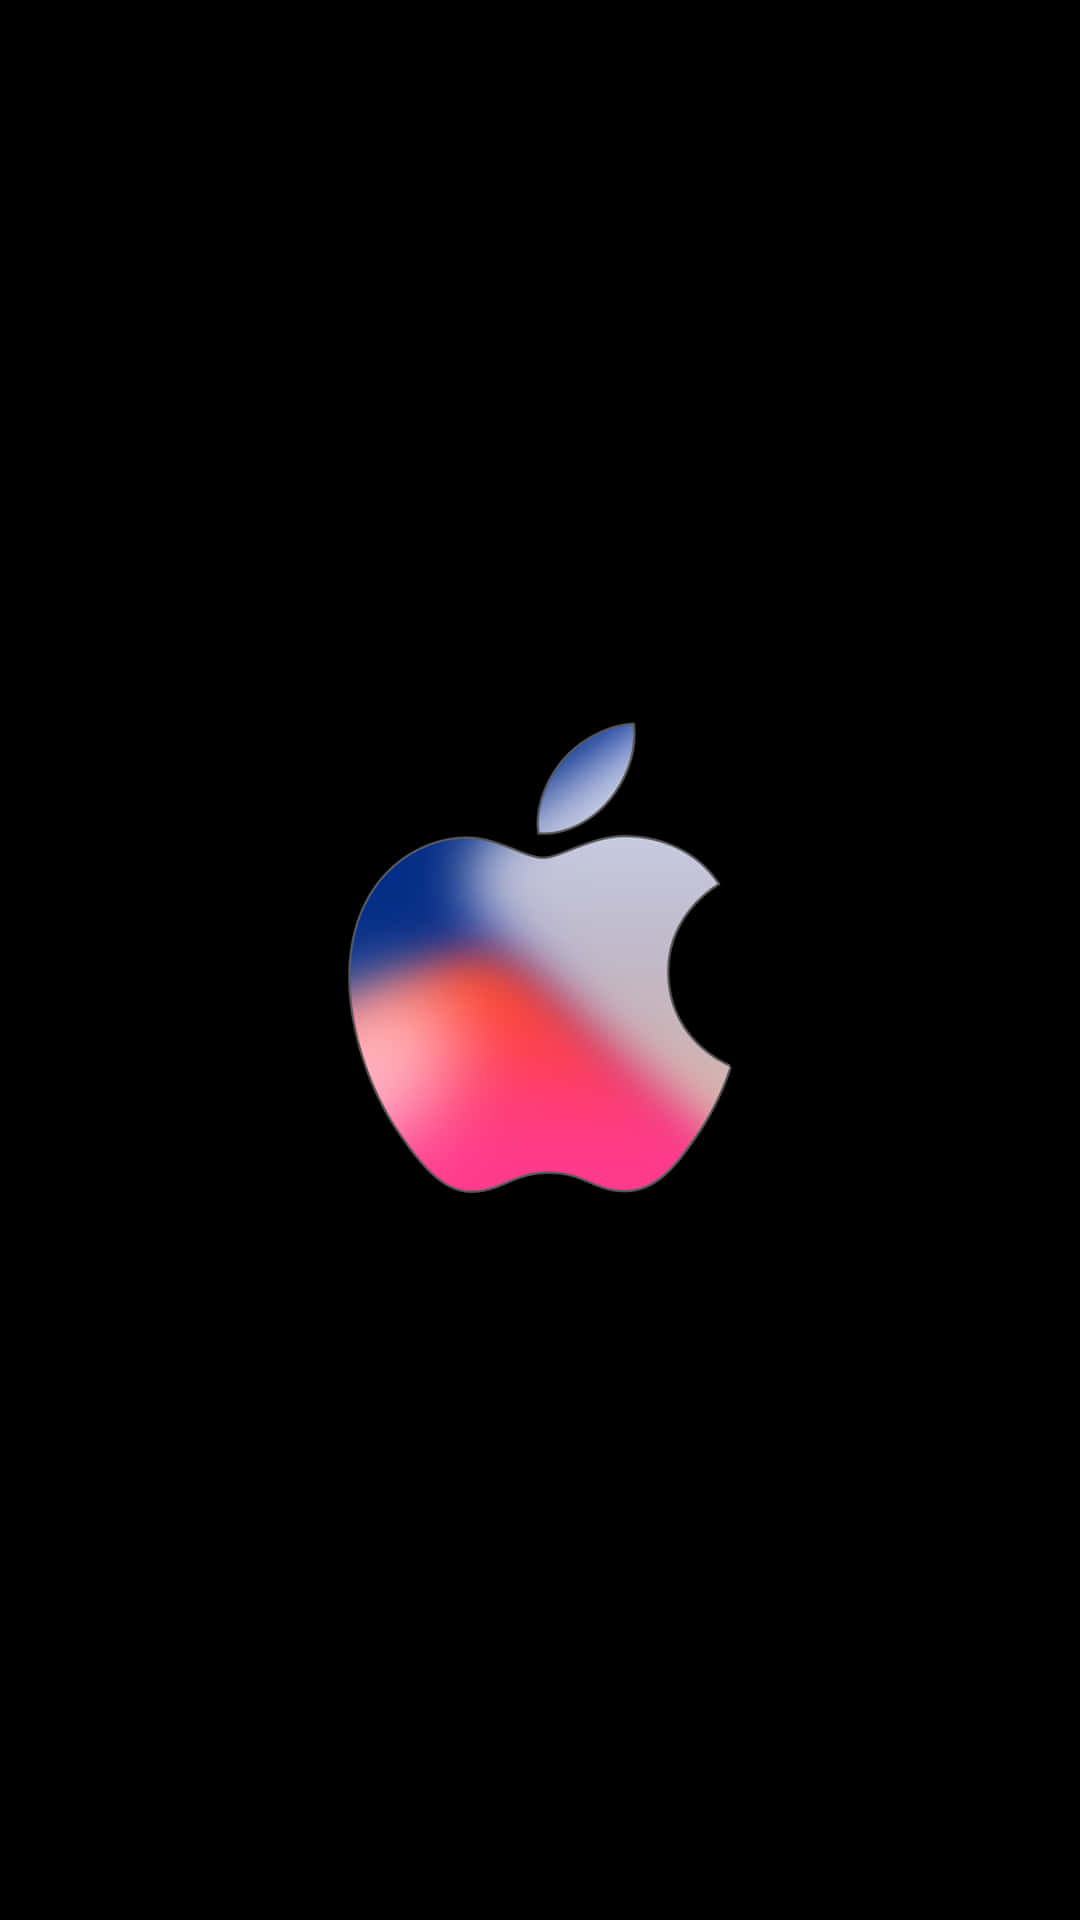 Vibrant Blue And Pink Apple Logo For Iphone Hd